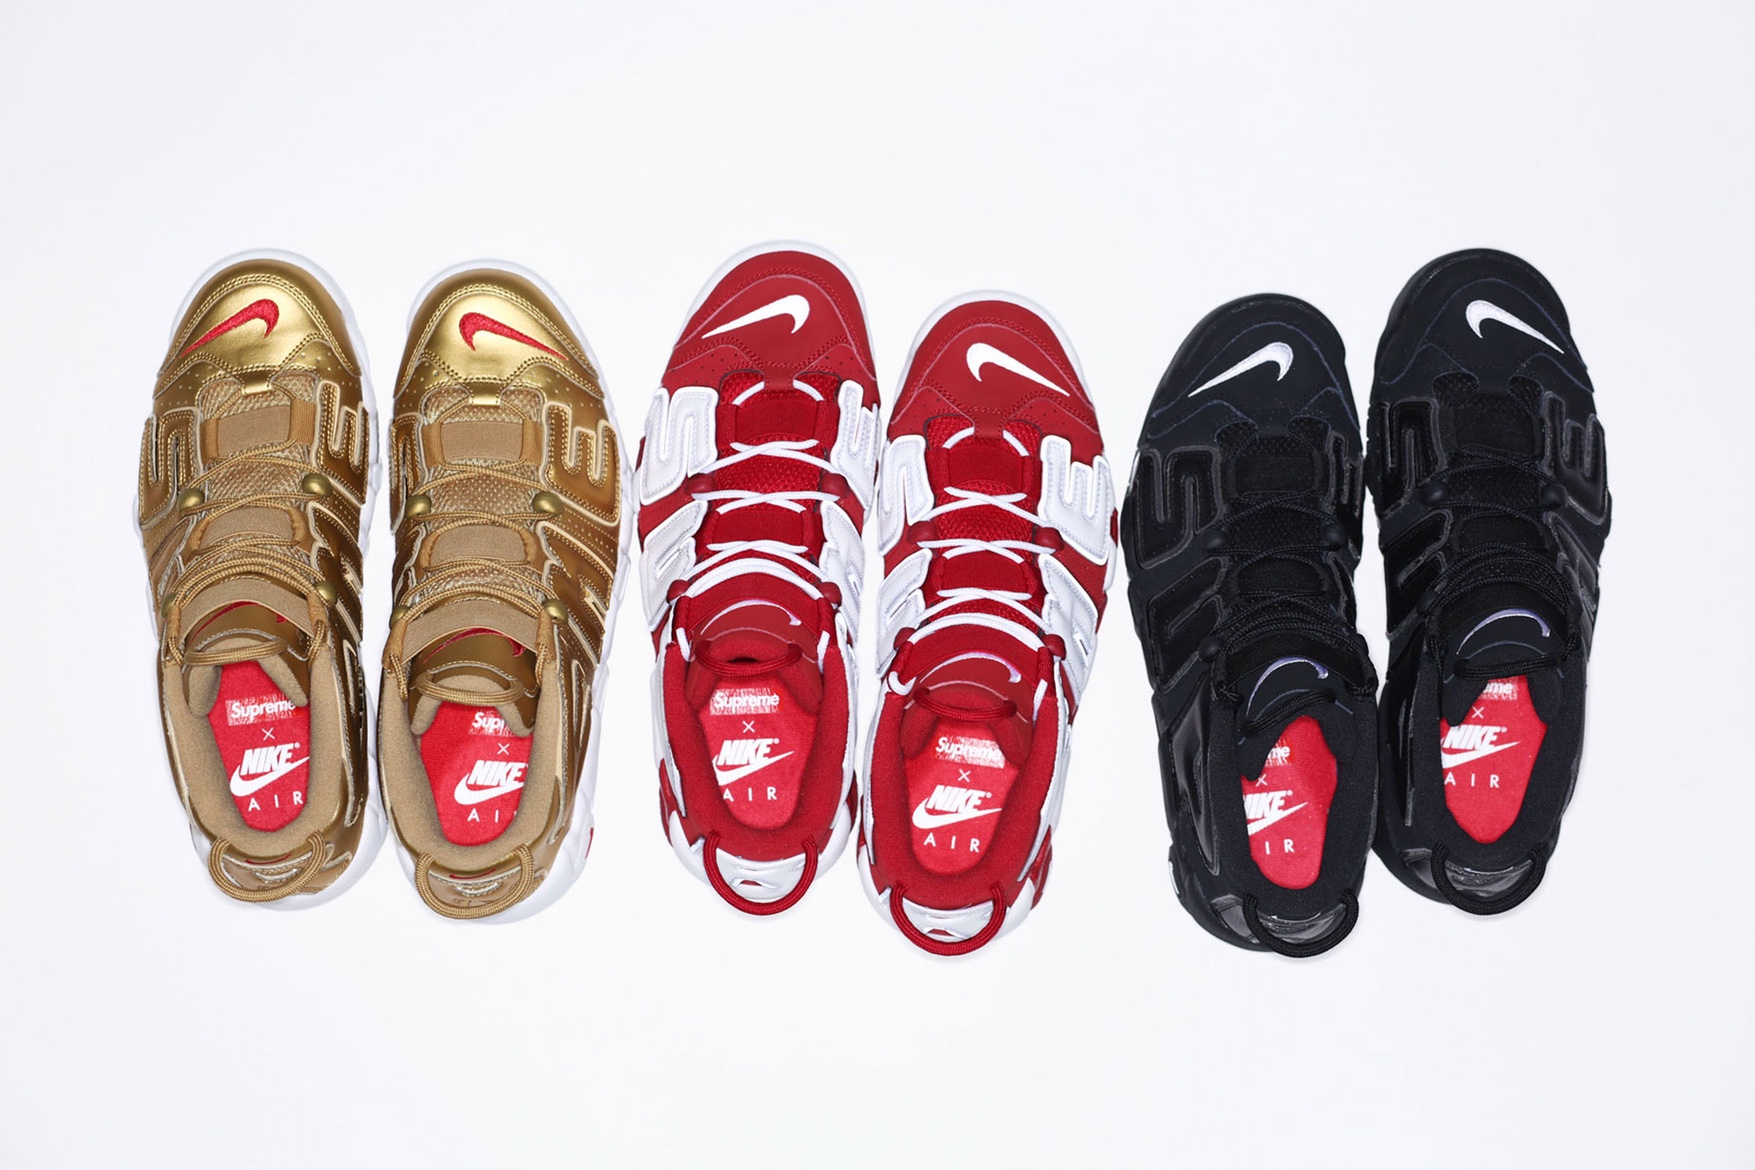 SOTWO - ⠀ Supreme Bamboo Beaded Curtain 17SS Supreme Nike Air More Uptempo  gold 17SS Supreme X Air Force 1 High Red ⠀ #레어바이블루에서찾아라